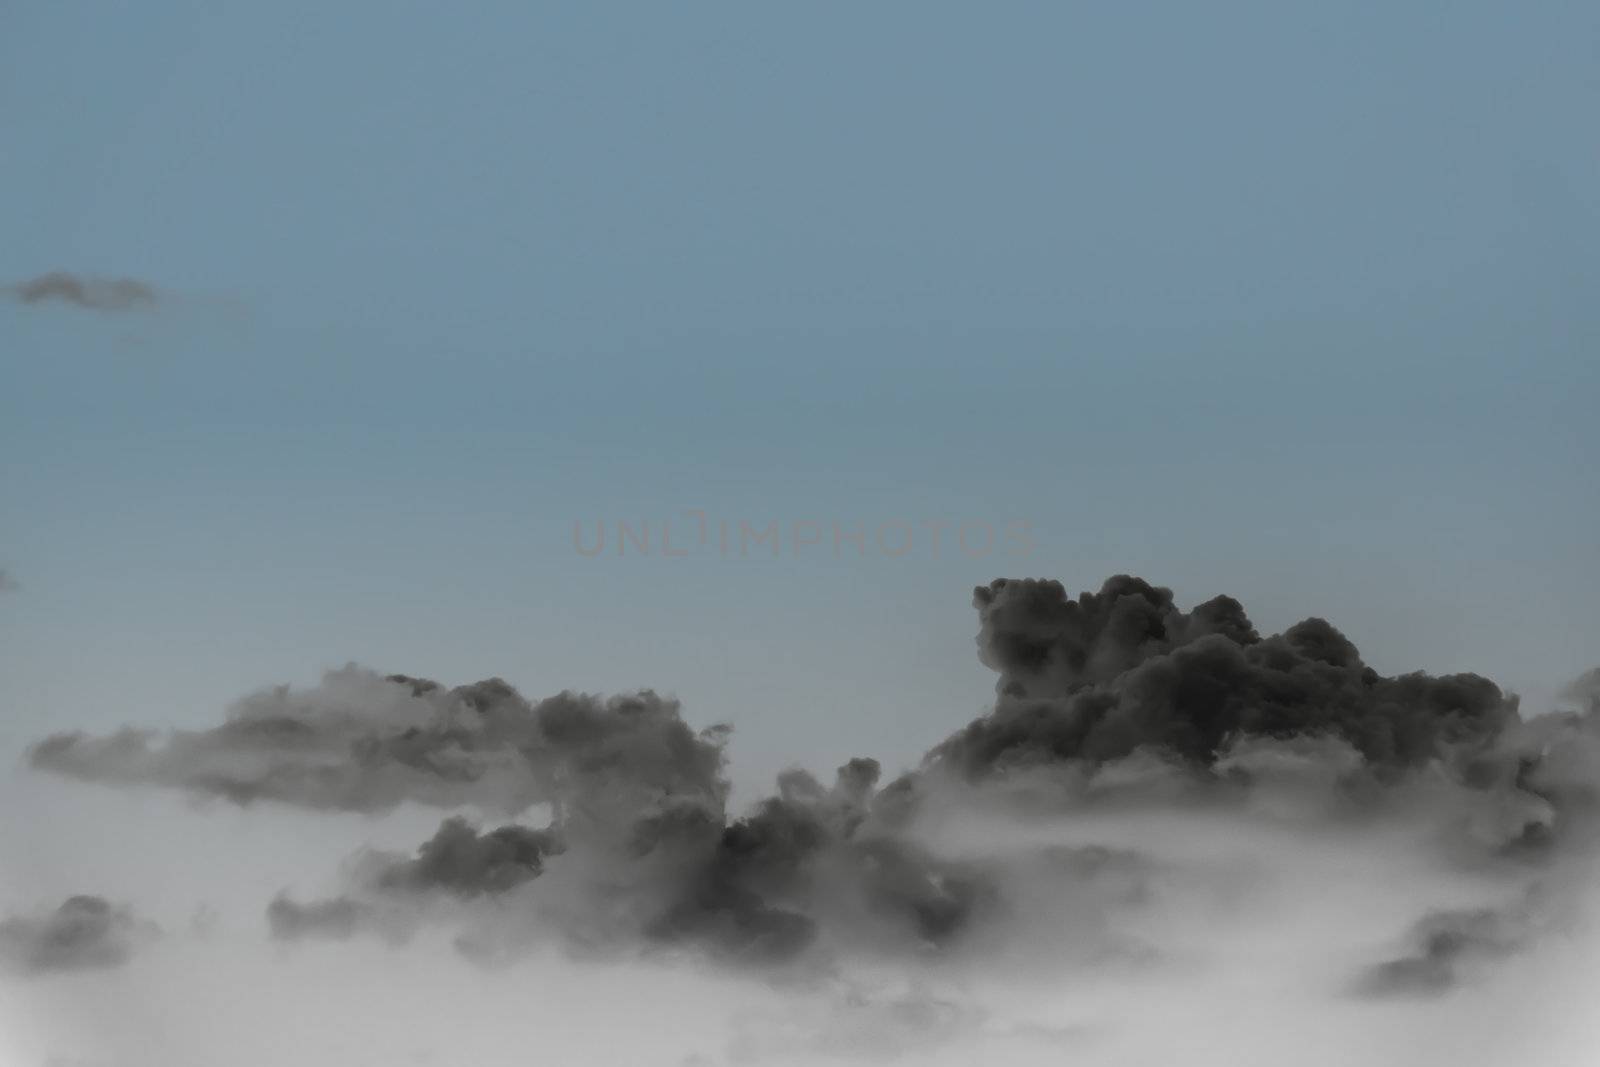 Abstract sky clouds background image by xfdly5